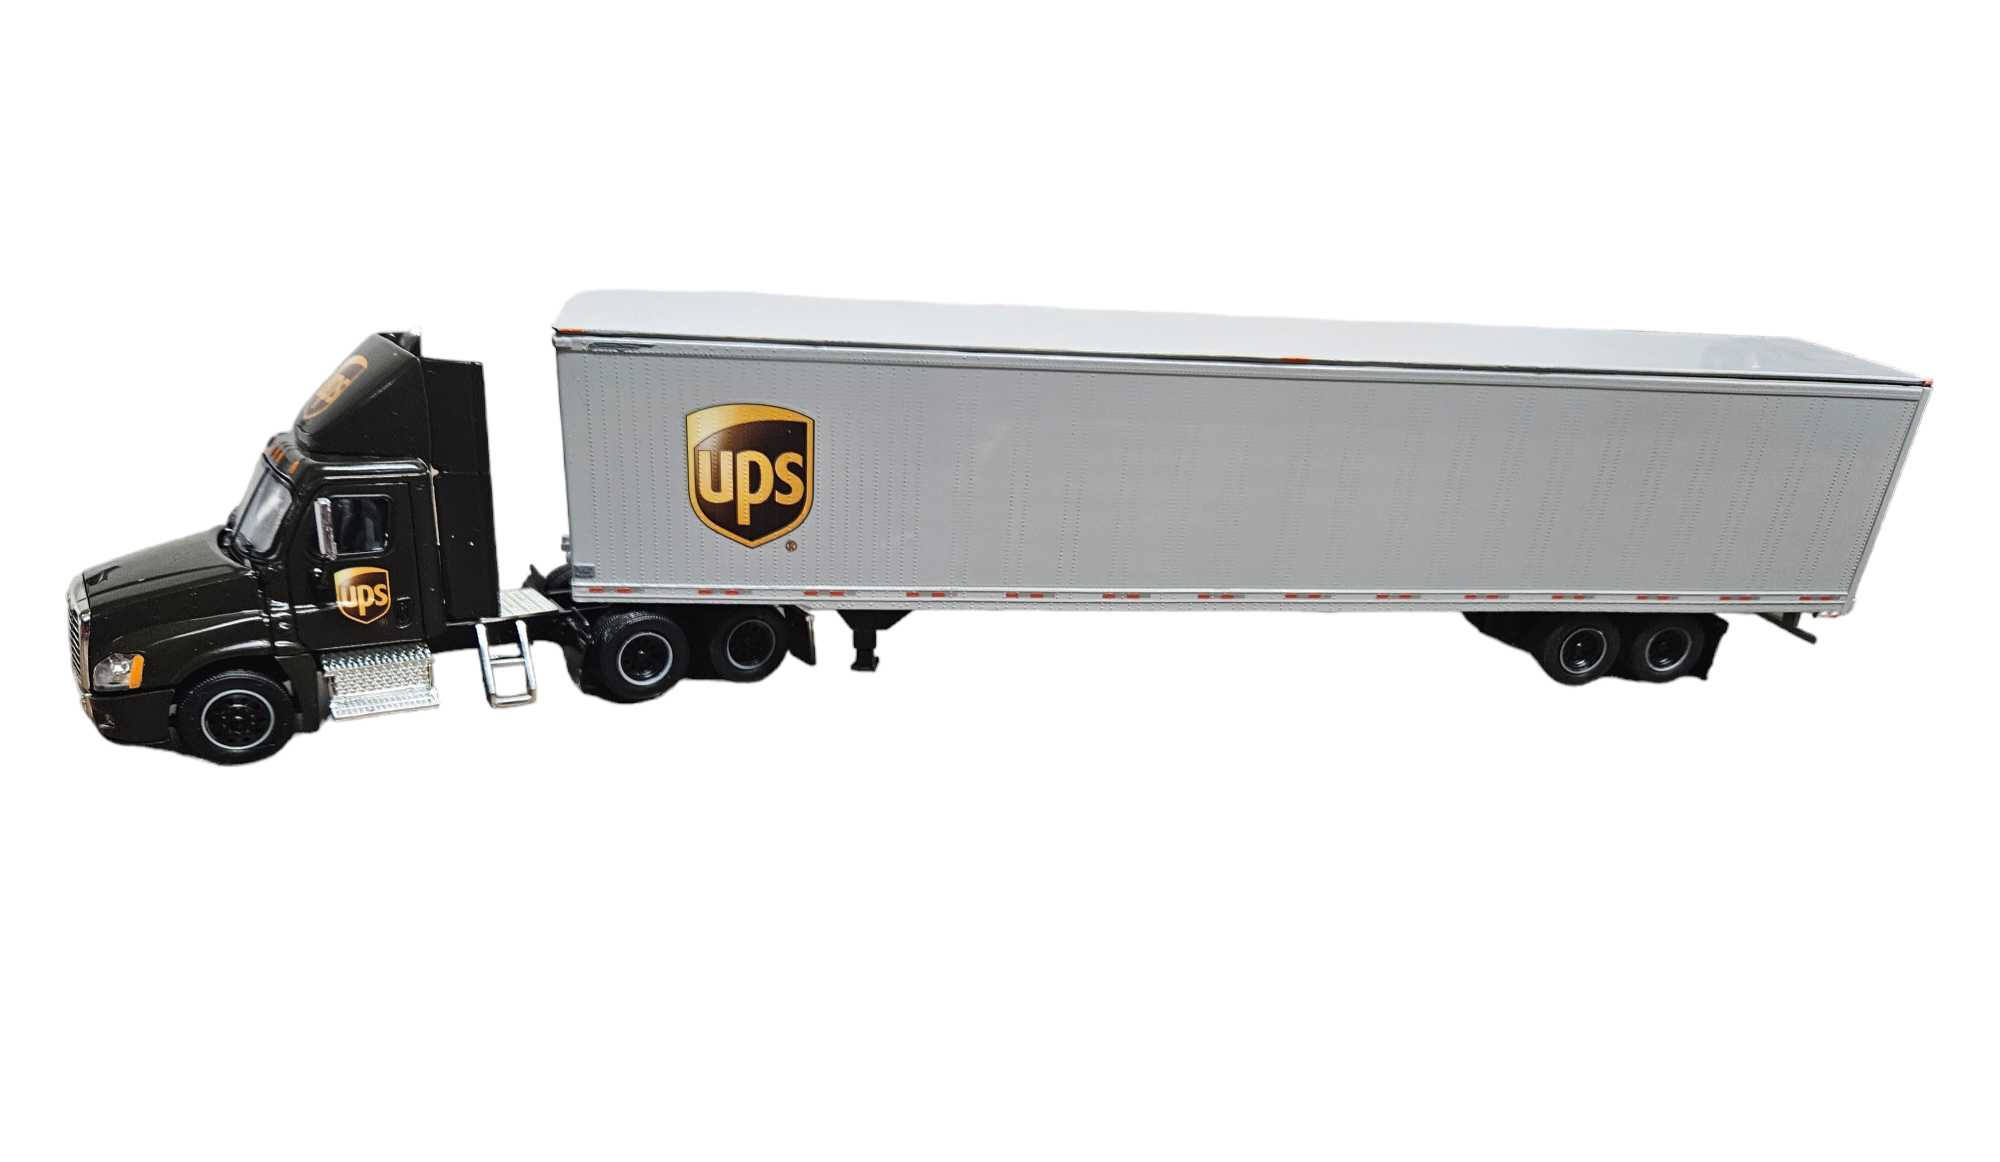 UPS FREIGHTLINER CASCSDIA DAYCAB WITH GDC in 1/53